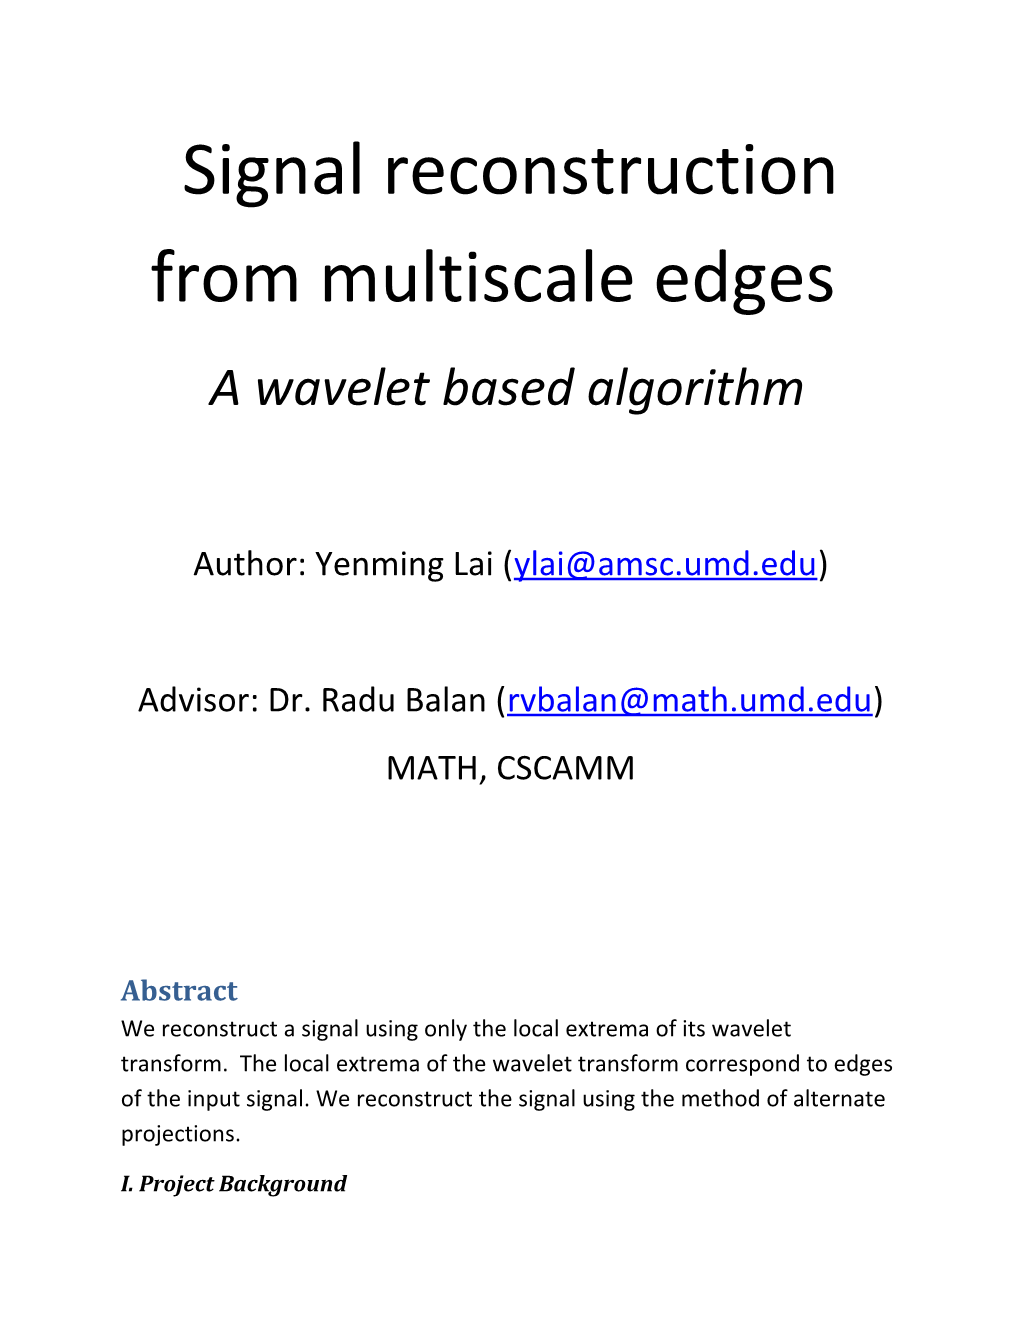 Signal Reconstruction from Multiscale Edges